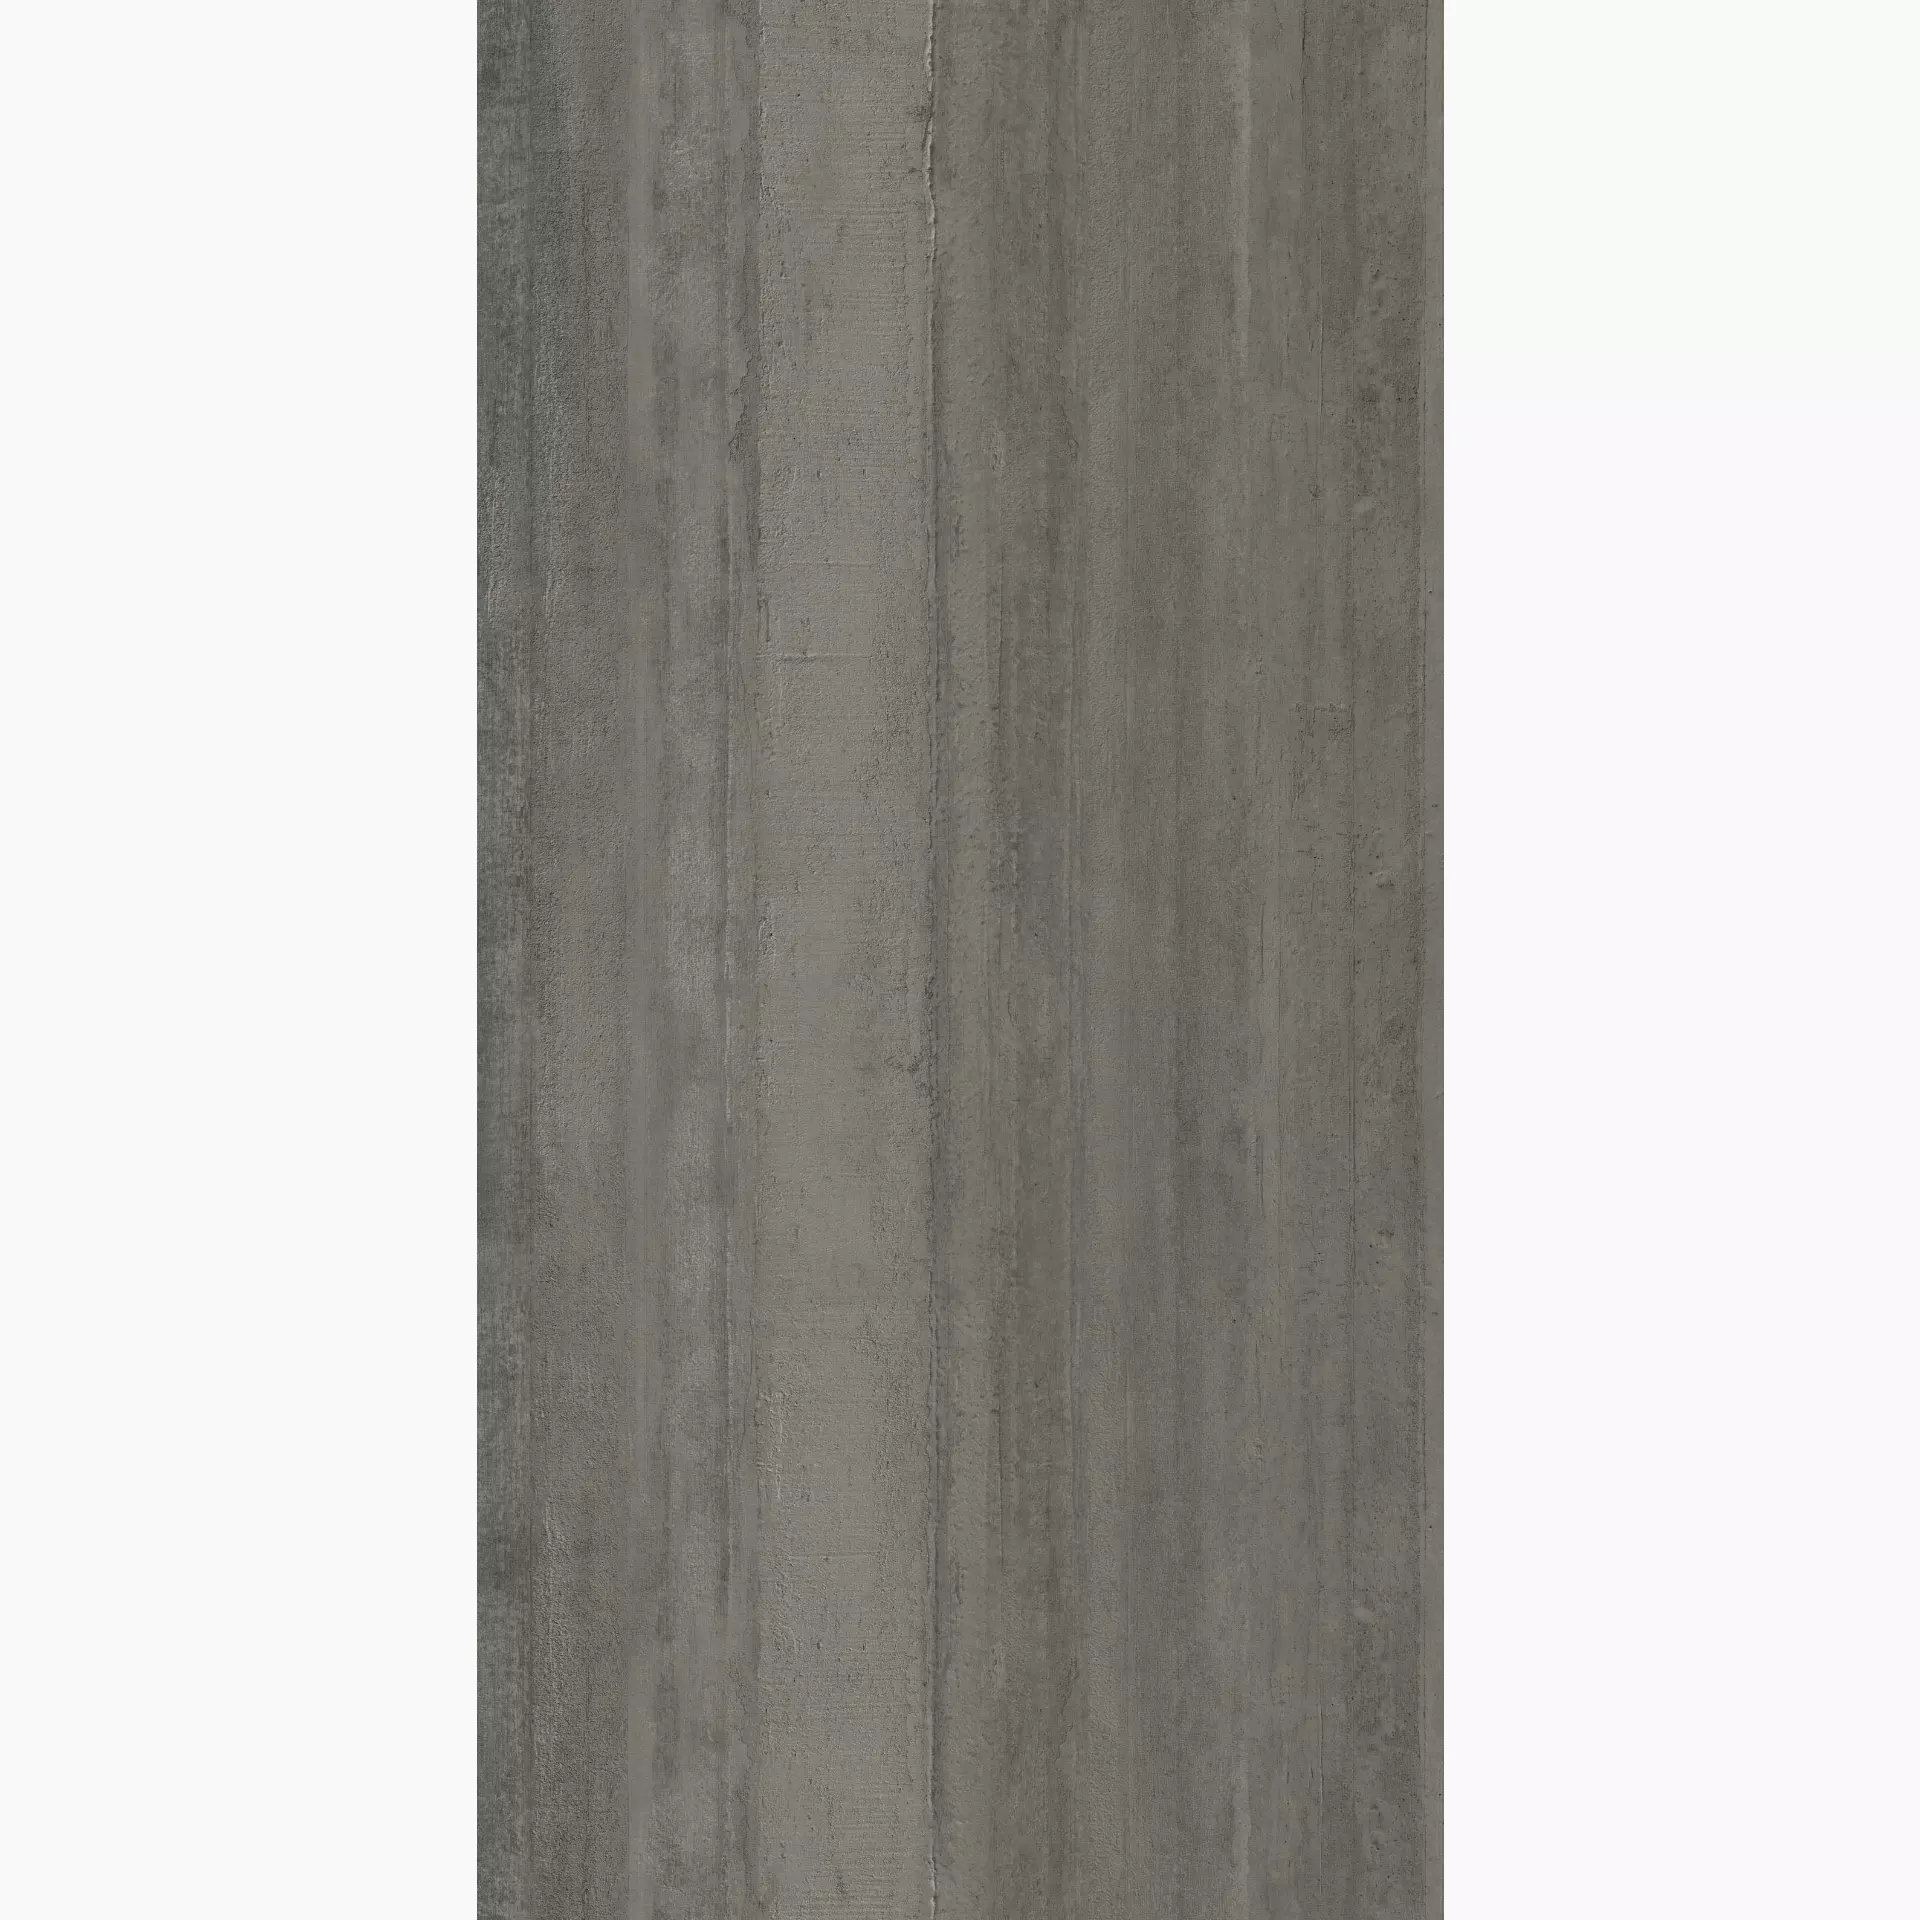 ABK Out.20 Lab325 Taupe Outdoor Form PF60002704 60x120cm rektifiziert 20mm